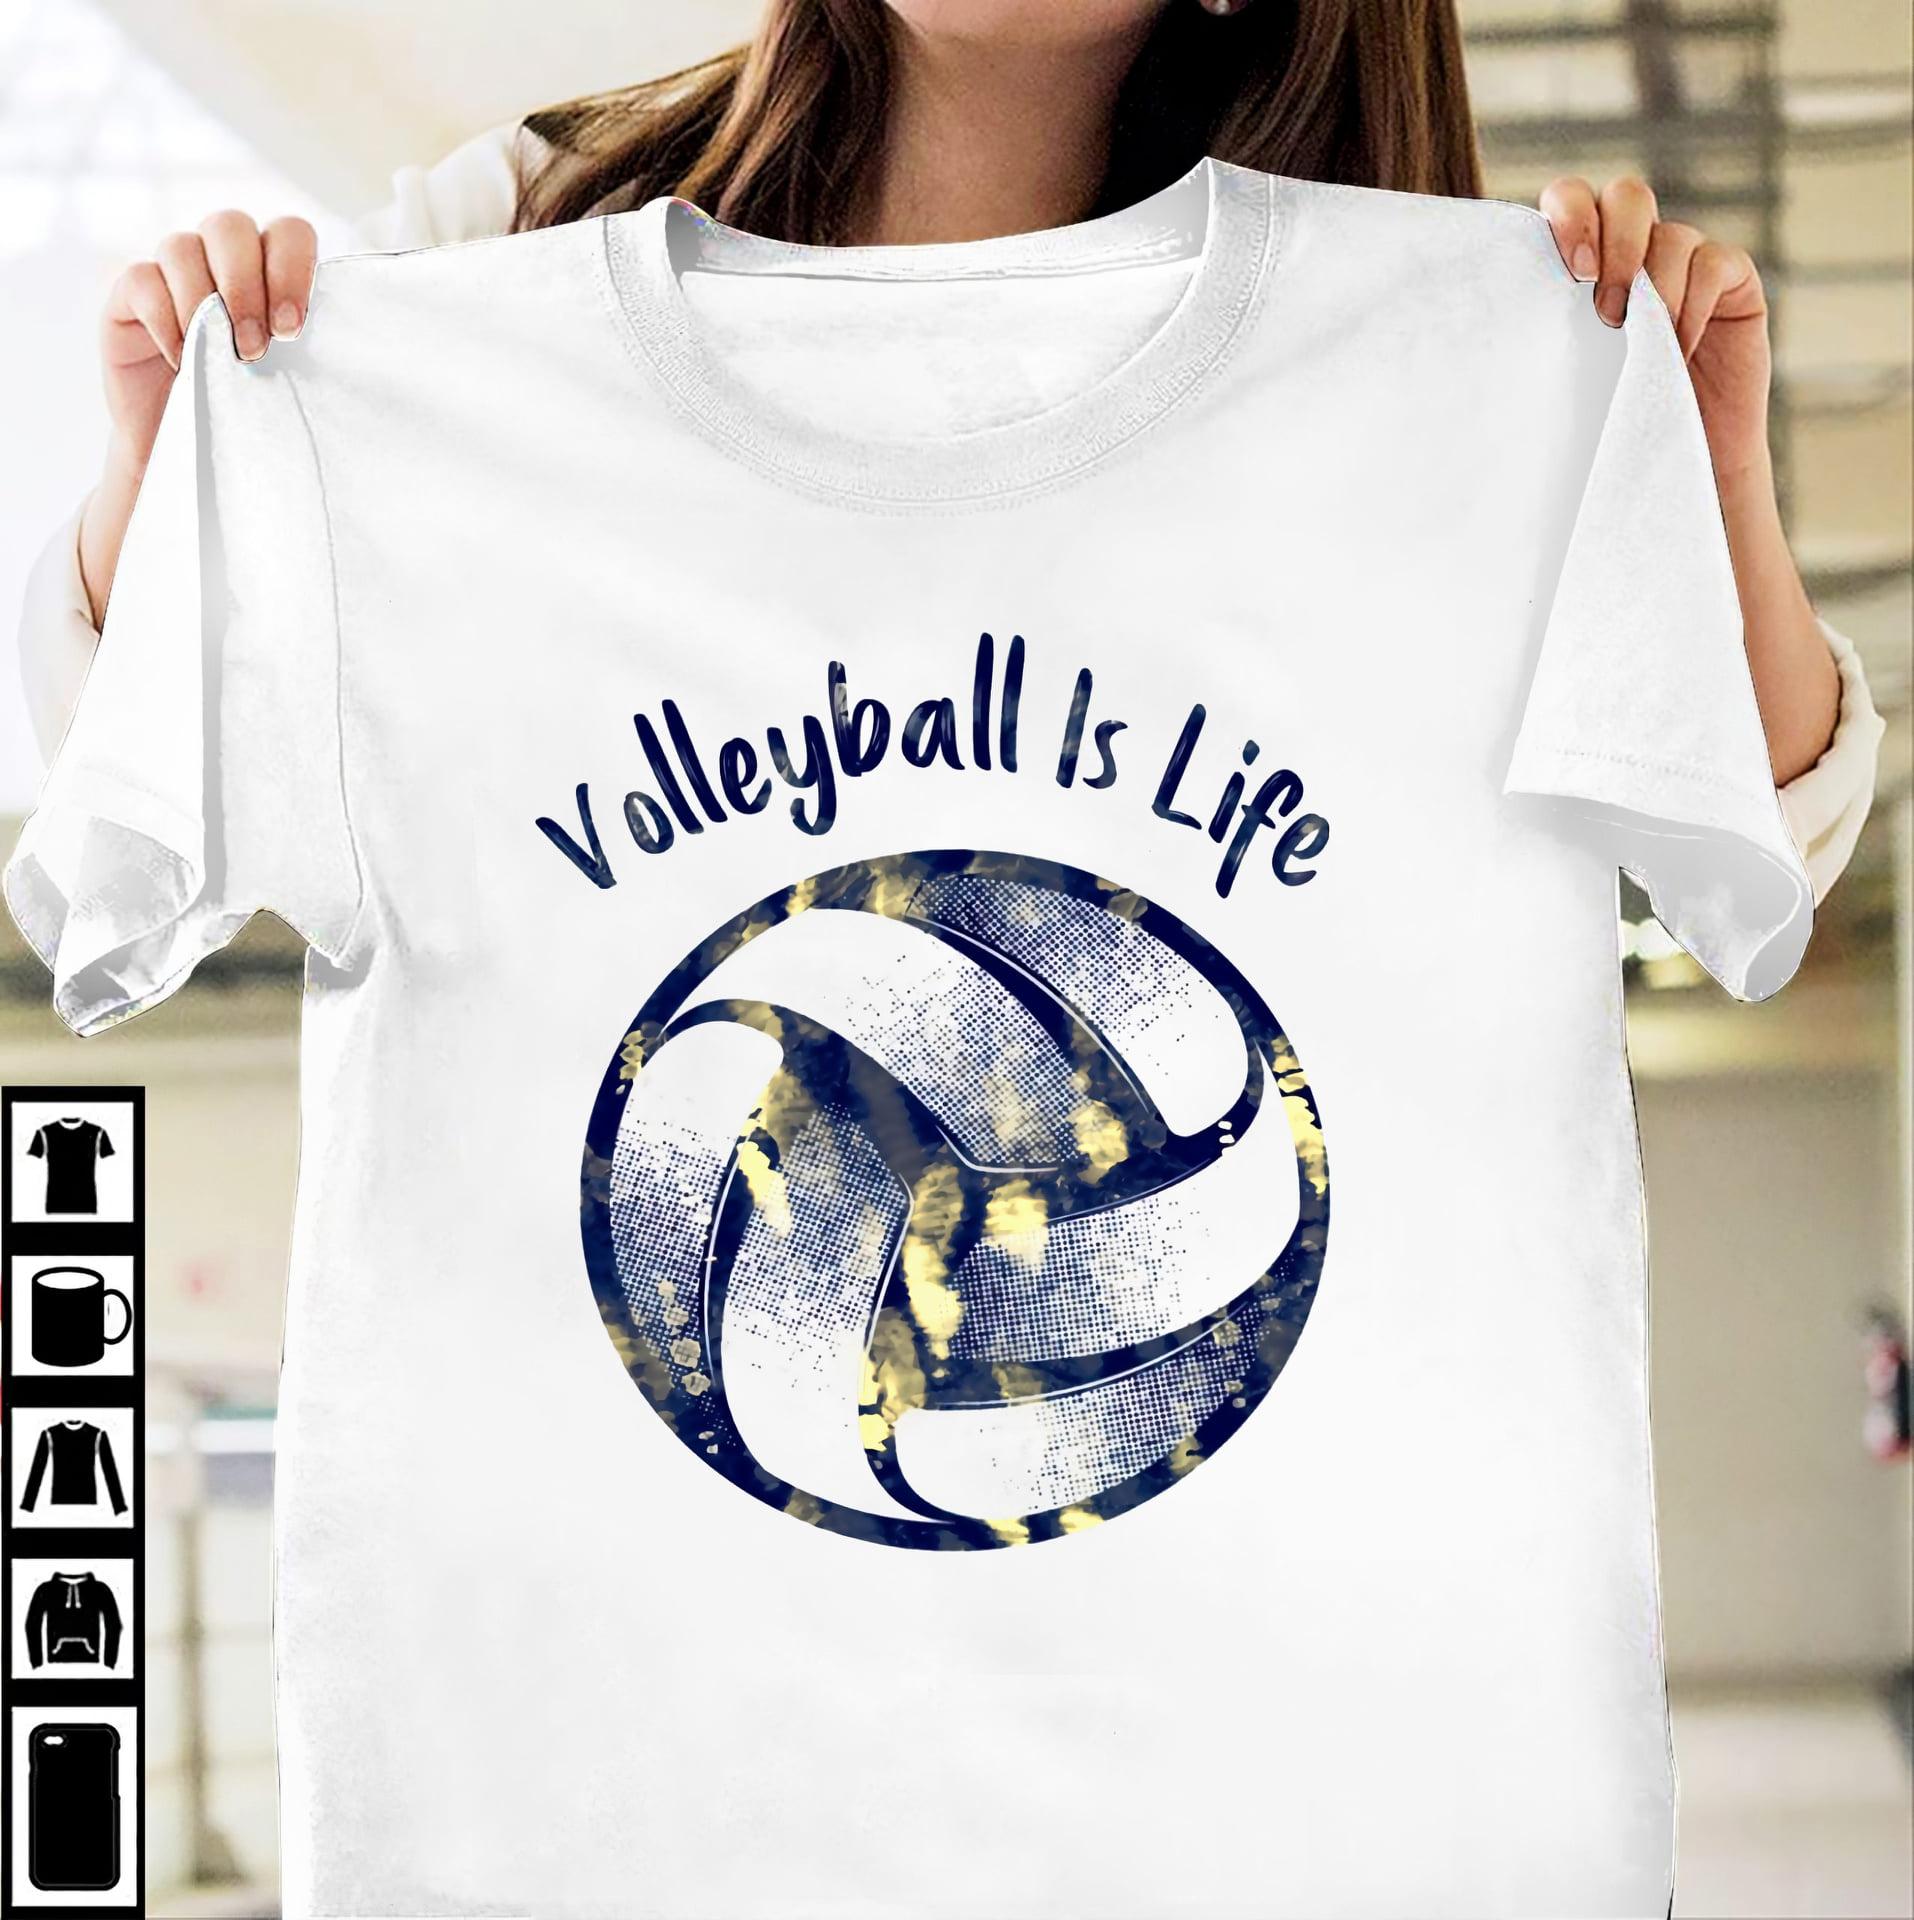 Volleyball is life - Volleyball player's gift, love playing volleyball